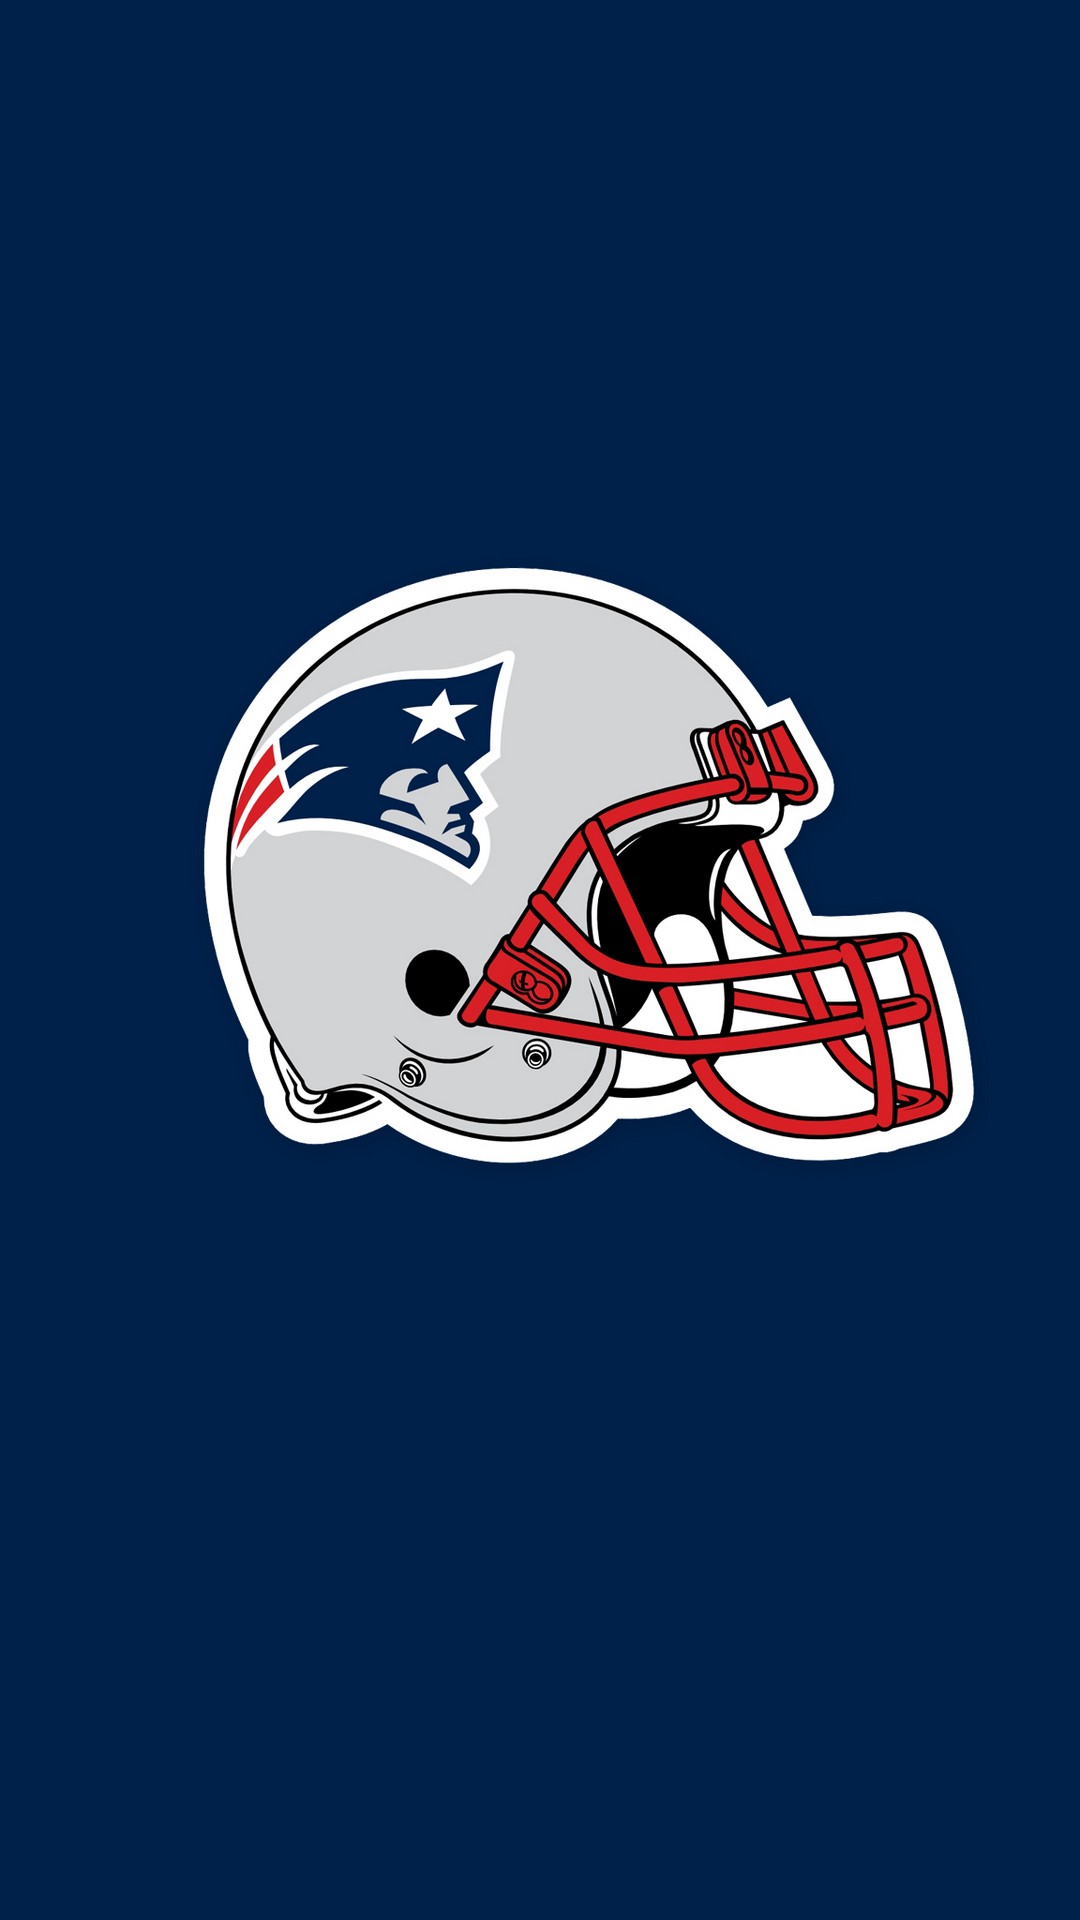 New England Patriots iPhone 6 Plus Wallpaper With high-resolution 1080X1920 pixel. Download and set as wallpaper for Apple iPhone X, XS Max, XR, 8, 7, 6, SE, iPad, Android